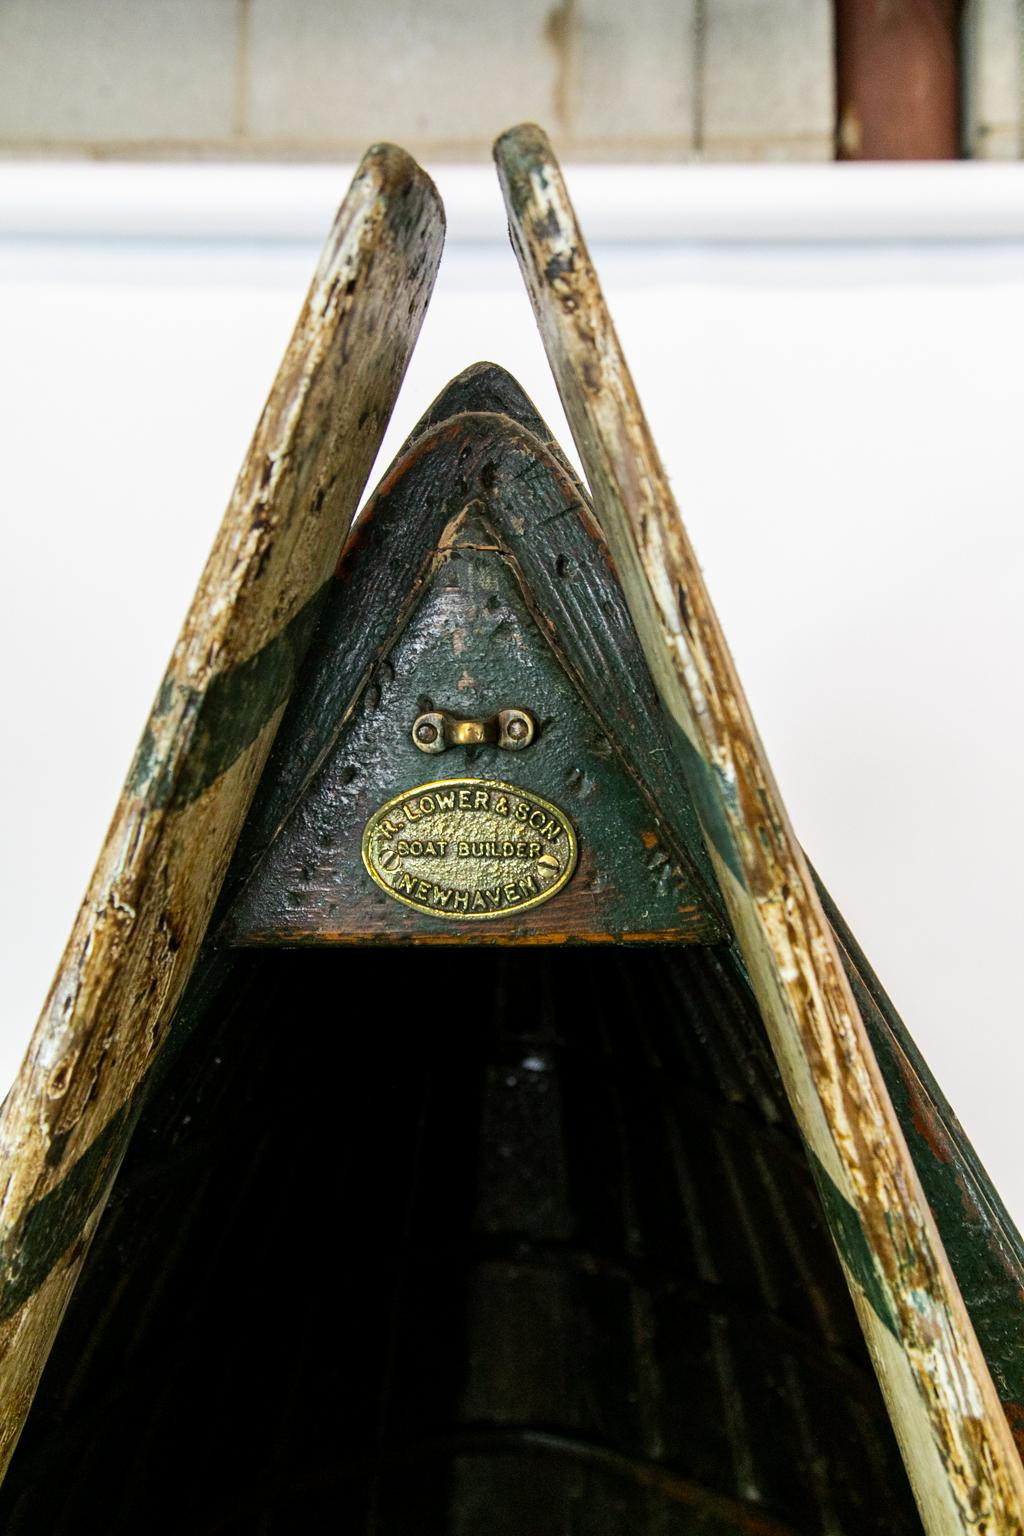 English boat shelf is made from an old boat hull with oars. It is signed by R. Lower and Sons boat builders, Newhaven.